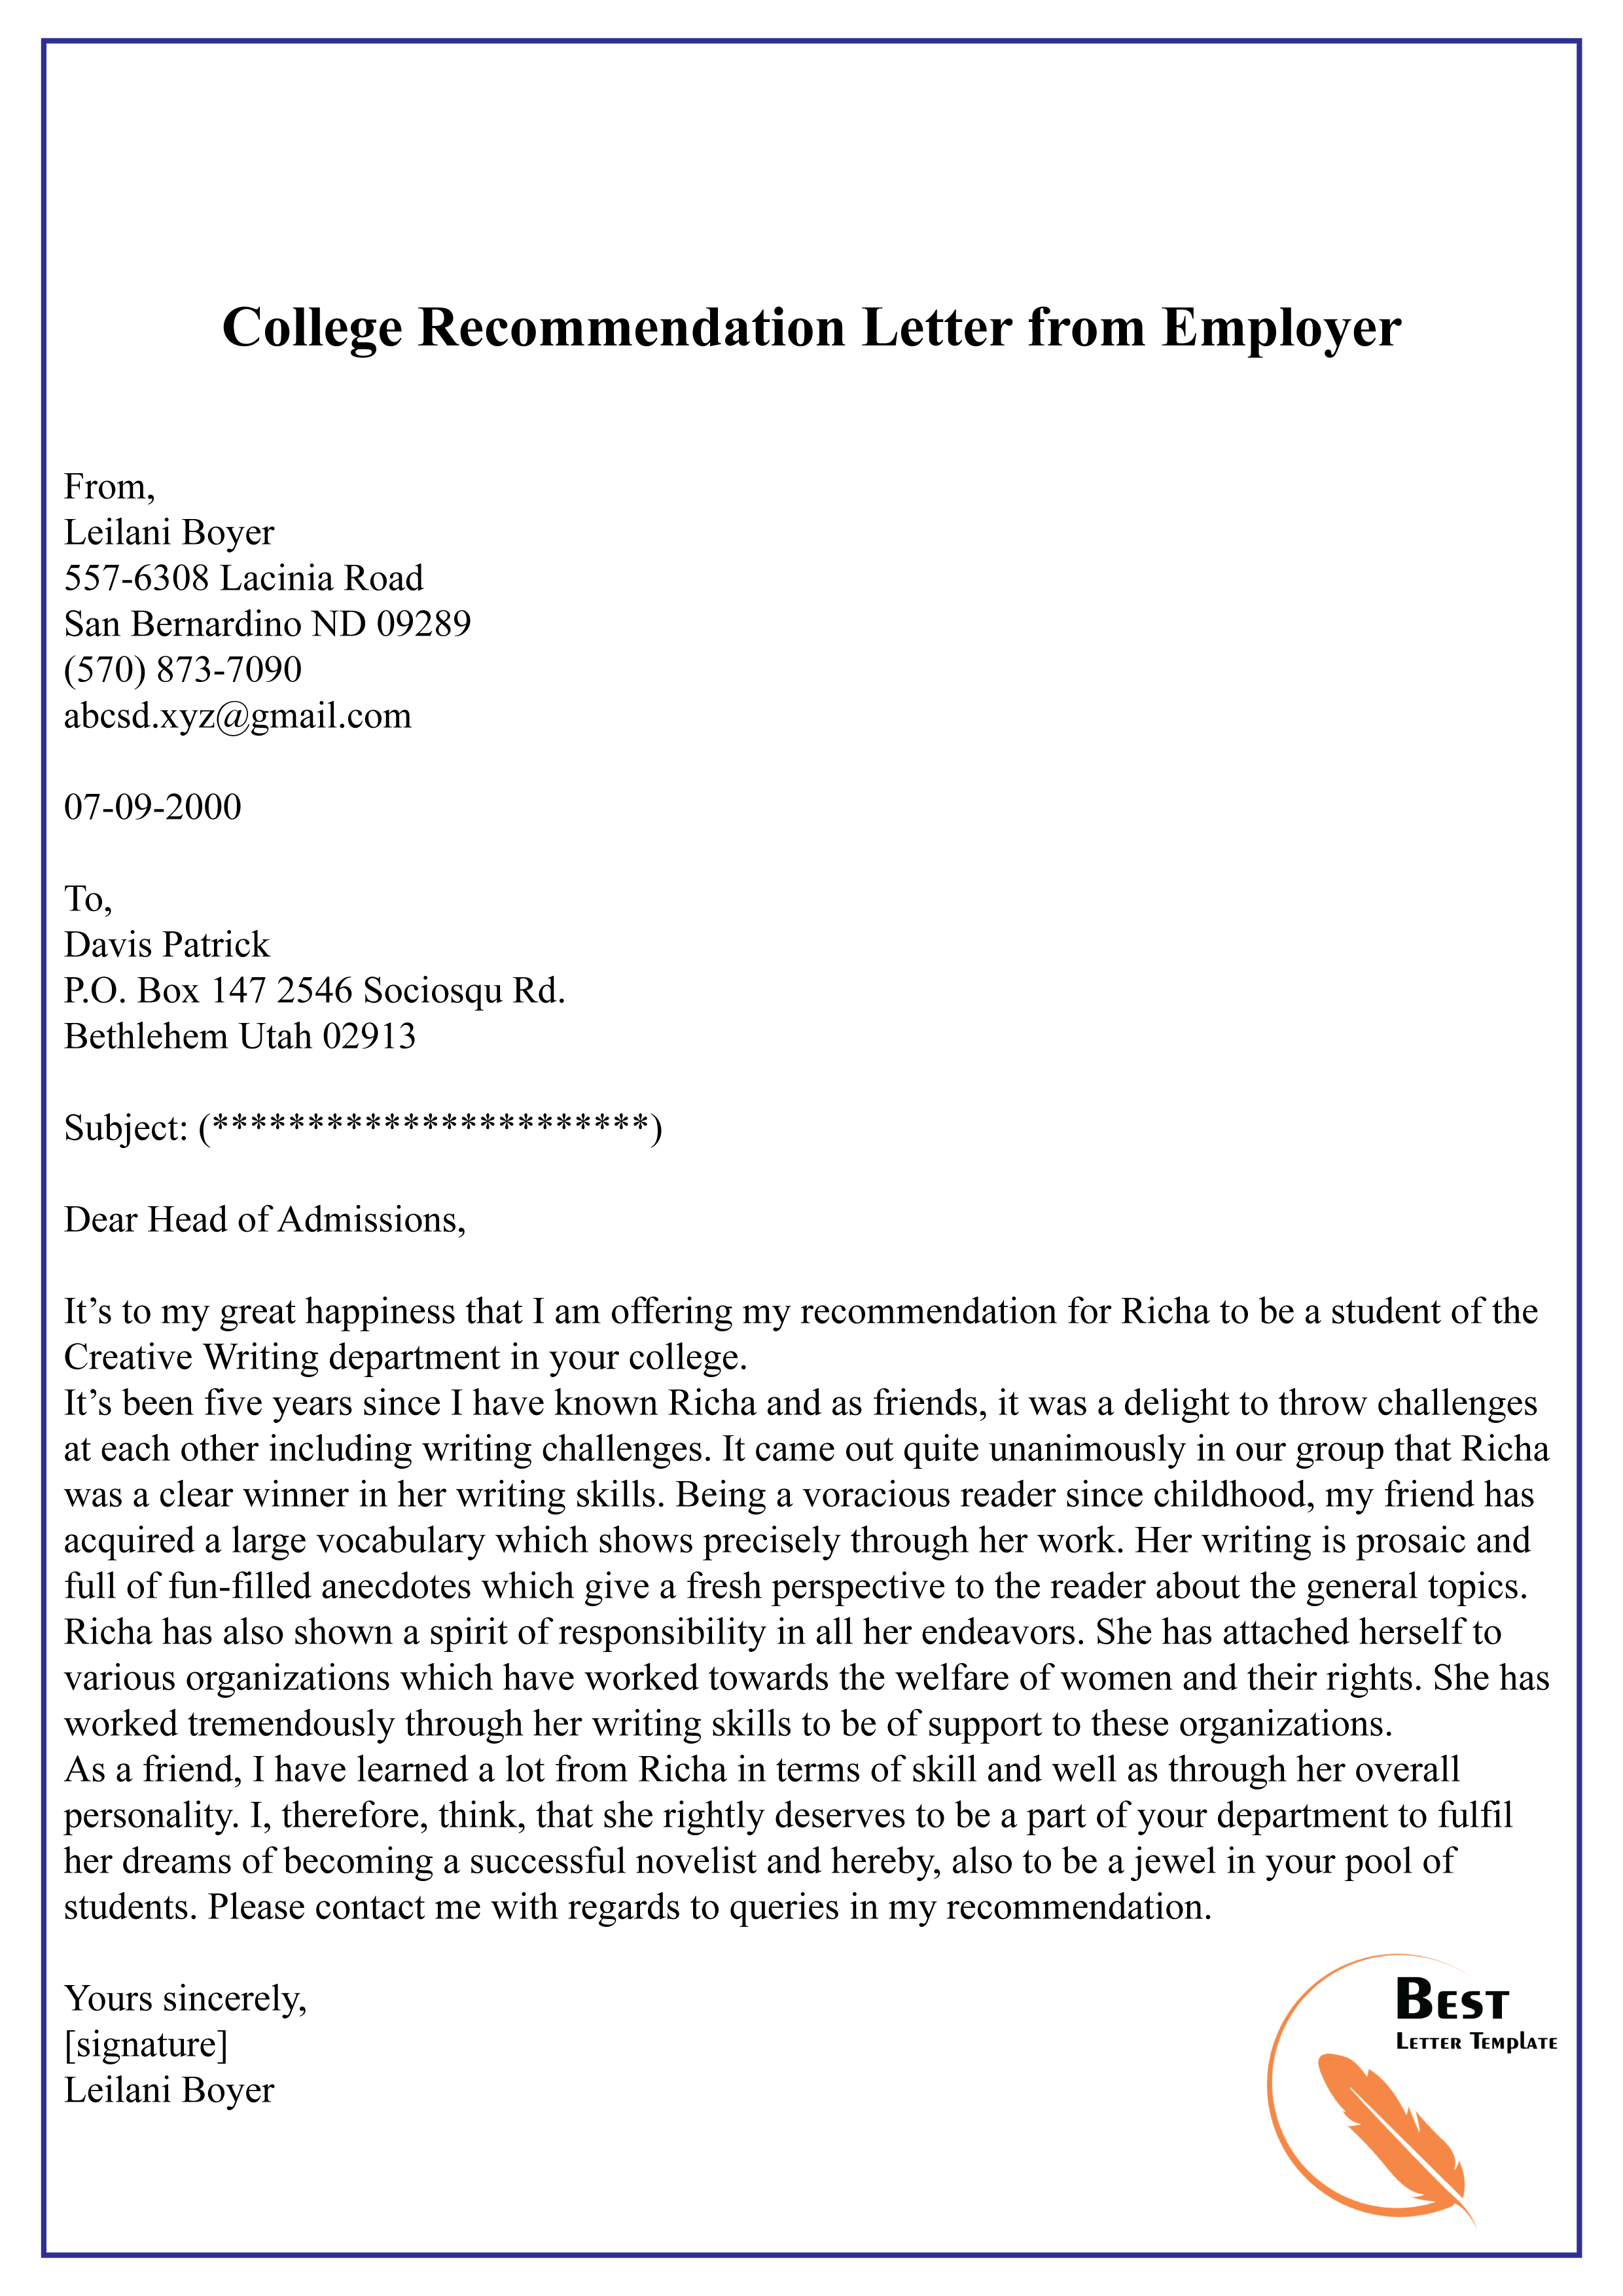 College Recommendation Letter Template from bestlettertemplate.com